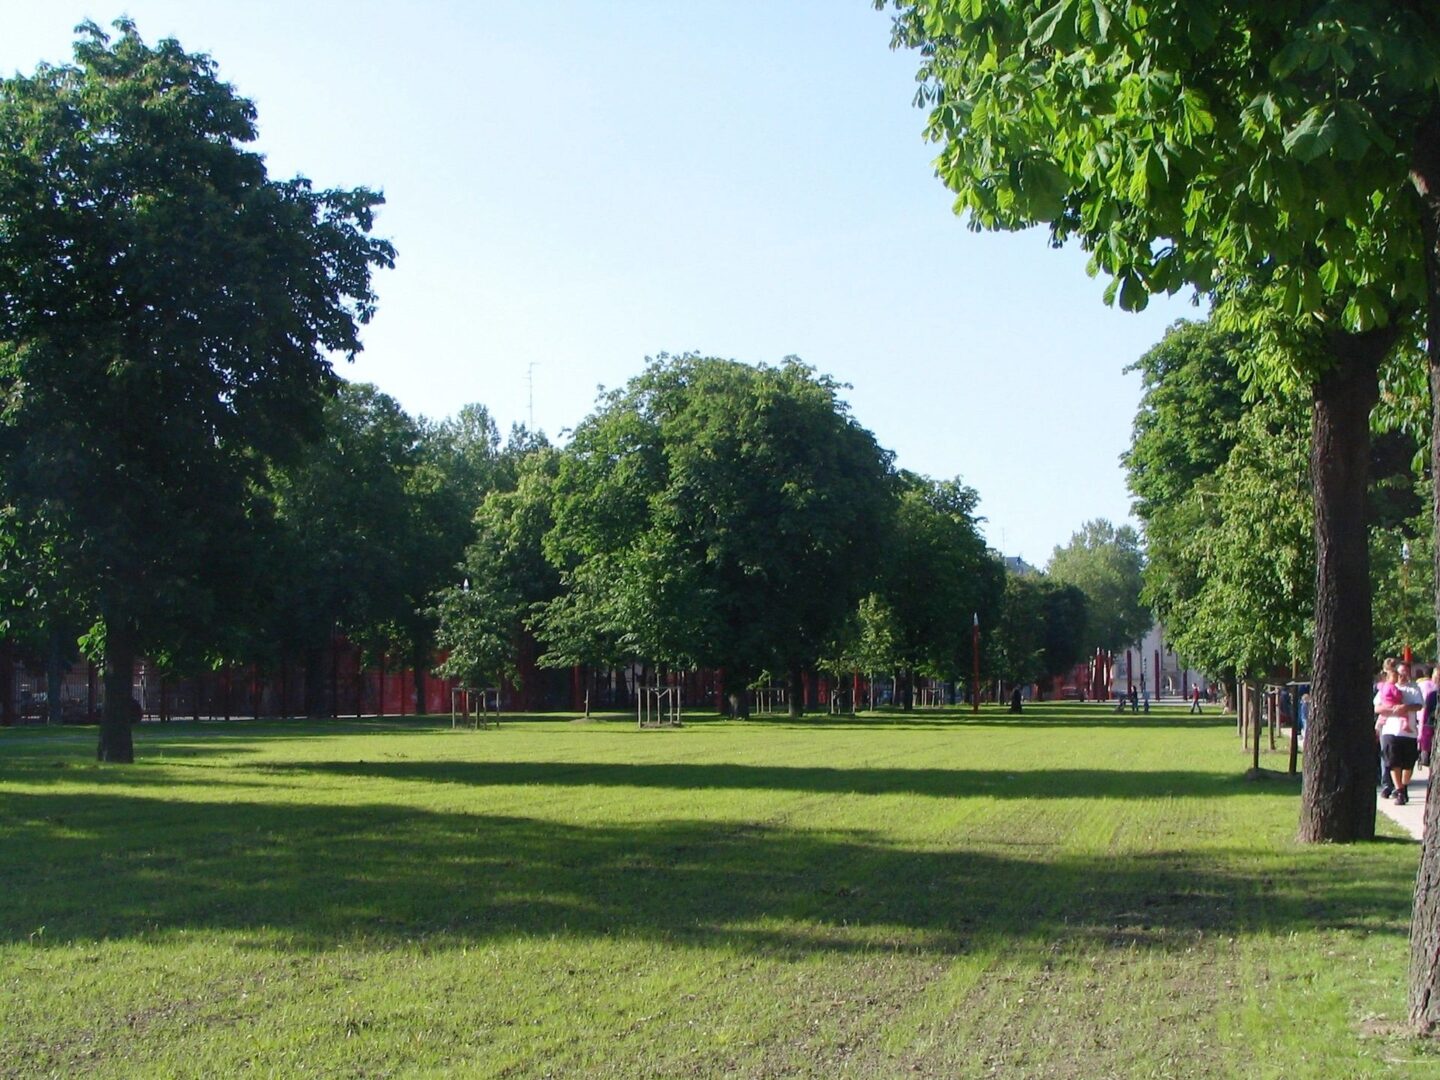 A park with trees and grass in the foreground.